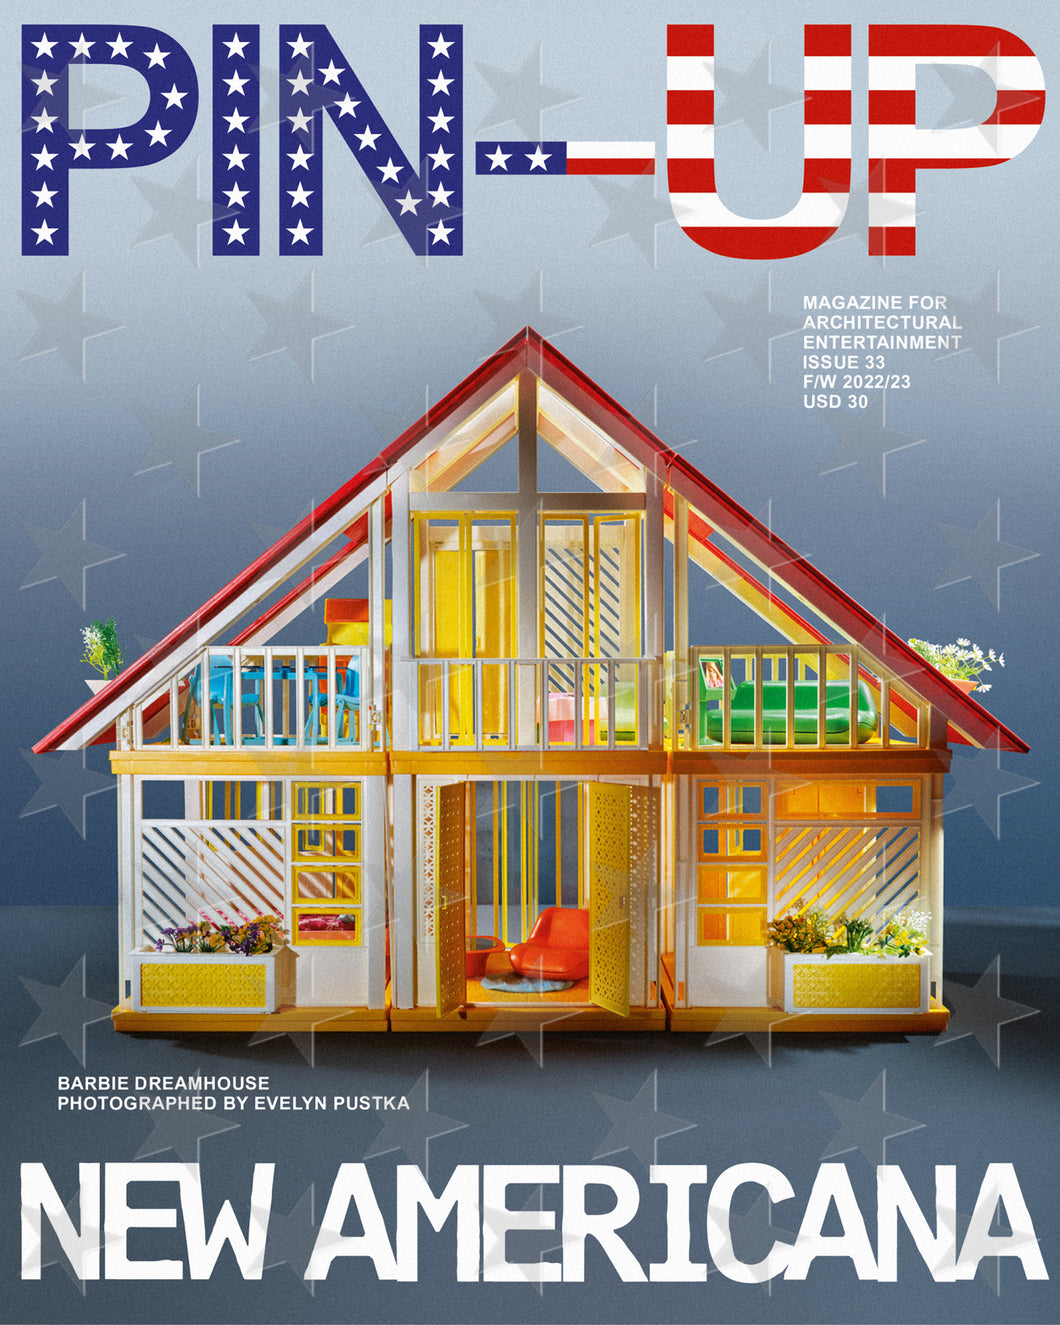 PIN–UP MAGAZINE: ISSUE 33 (NEW AMERICANA - BARBIE DREAMHOUSE)